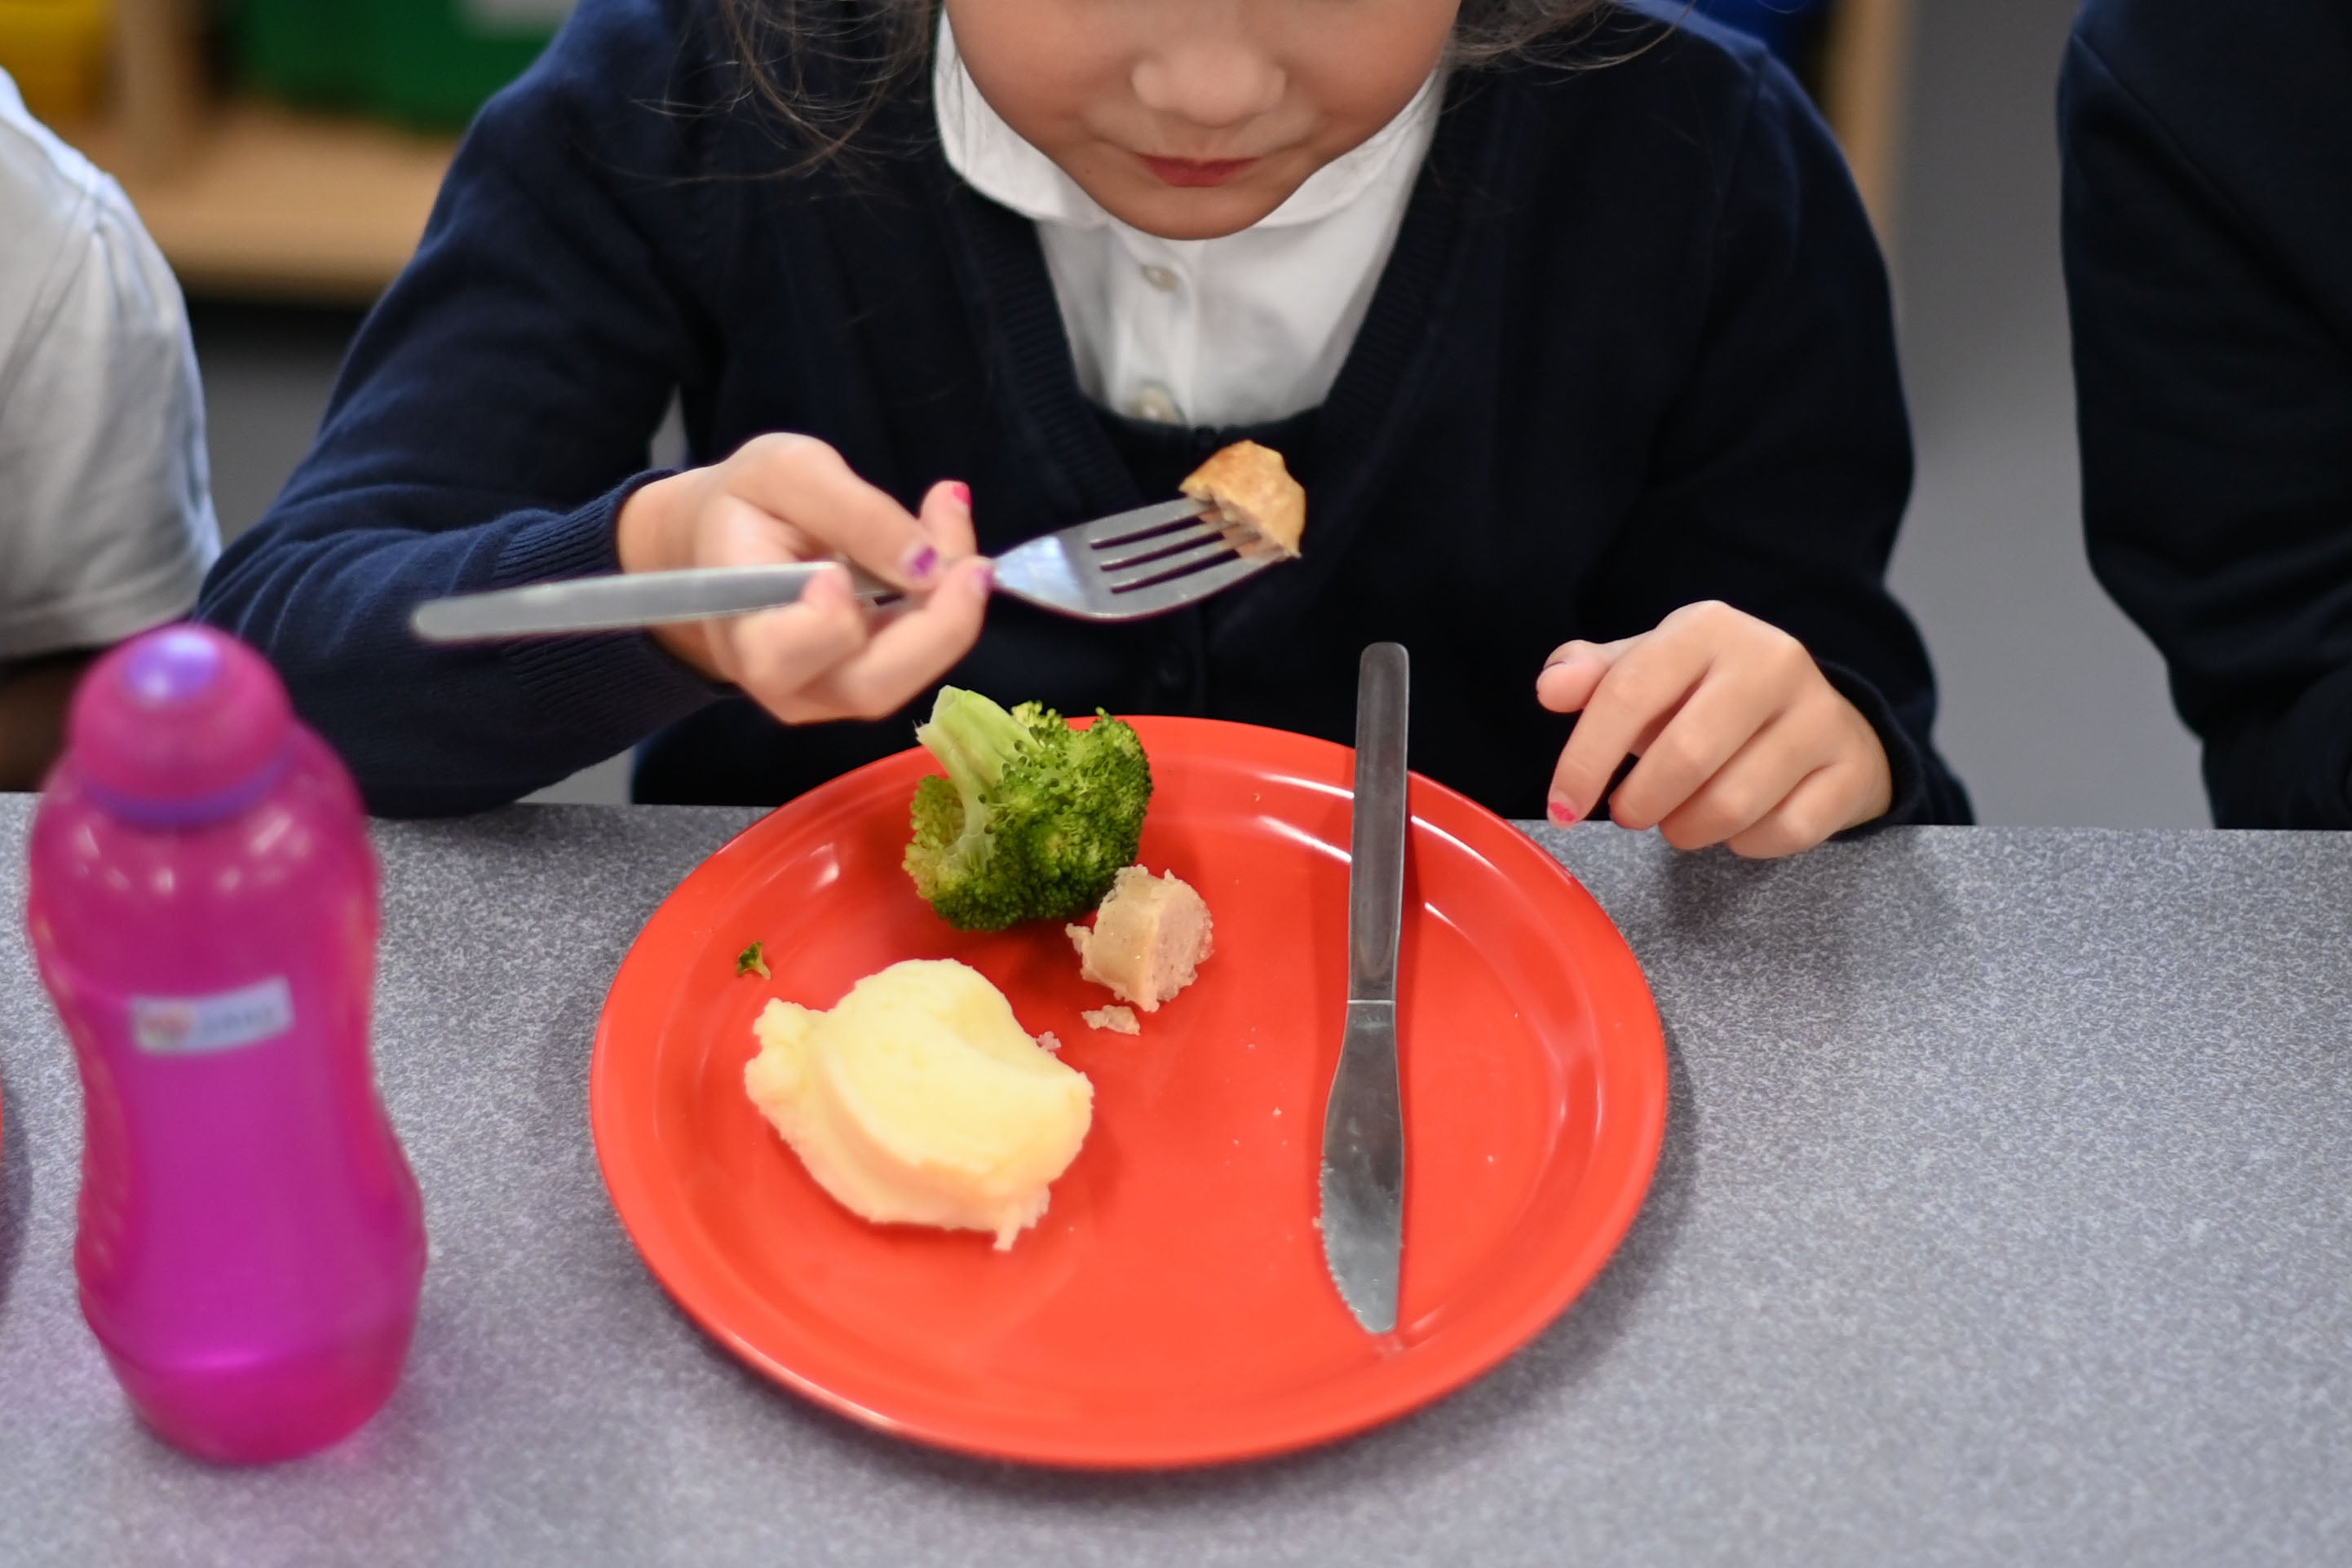 The provision of free school meals during the holiday has become a key issue